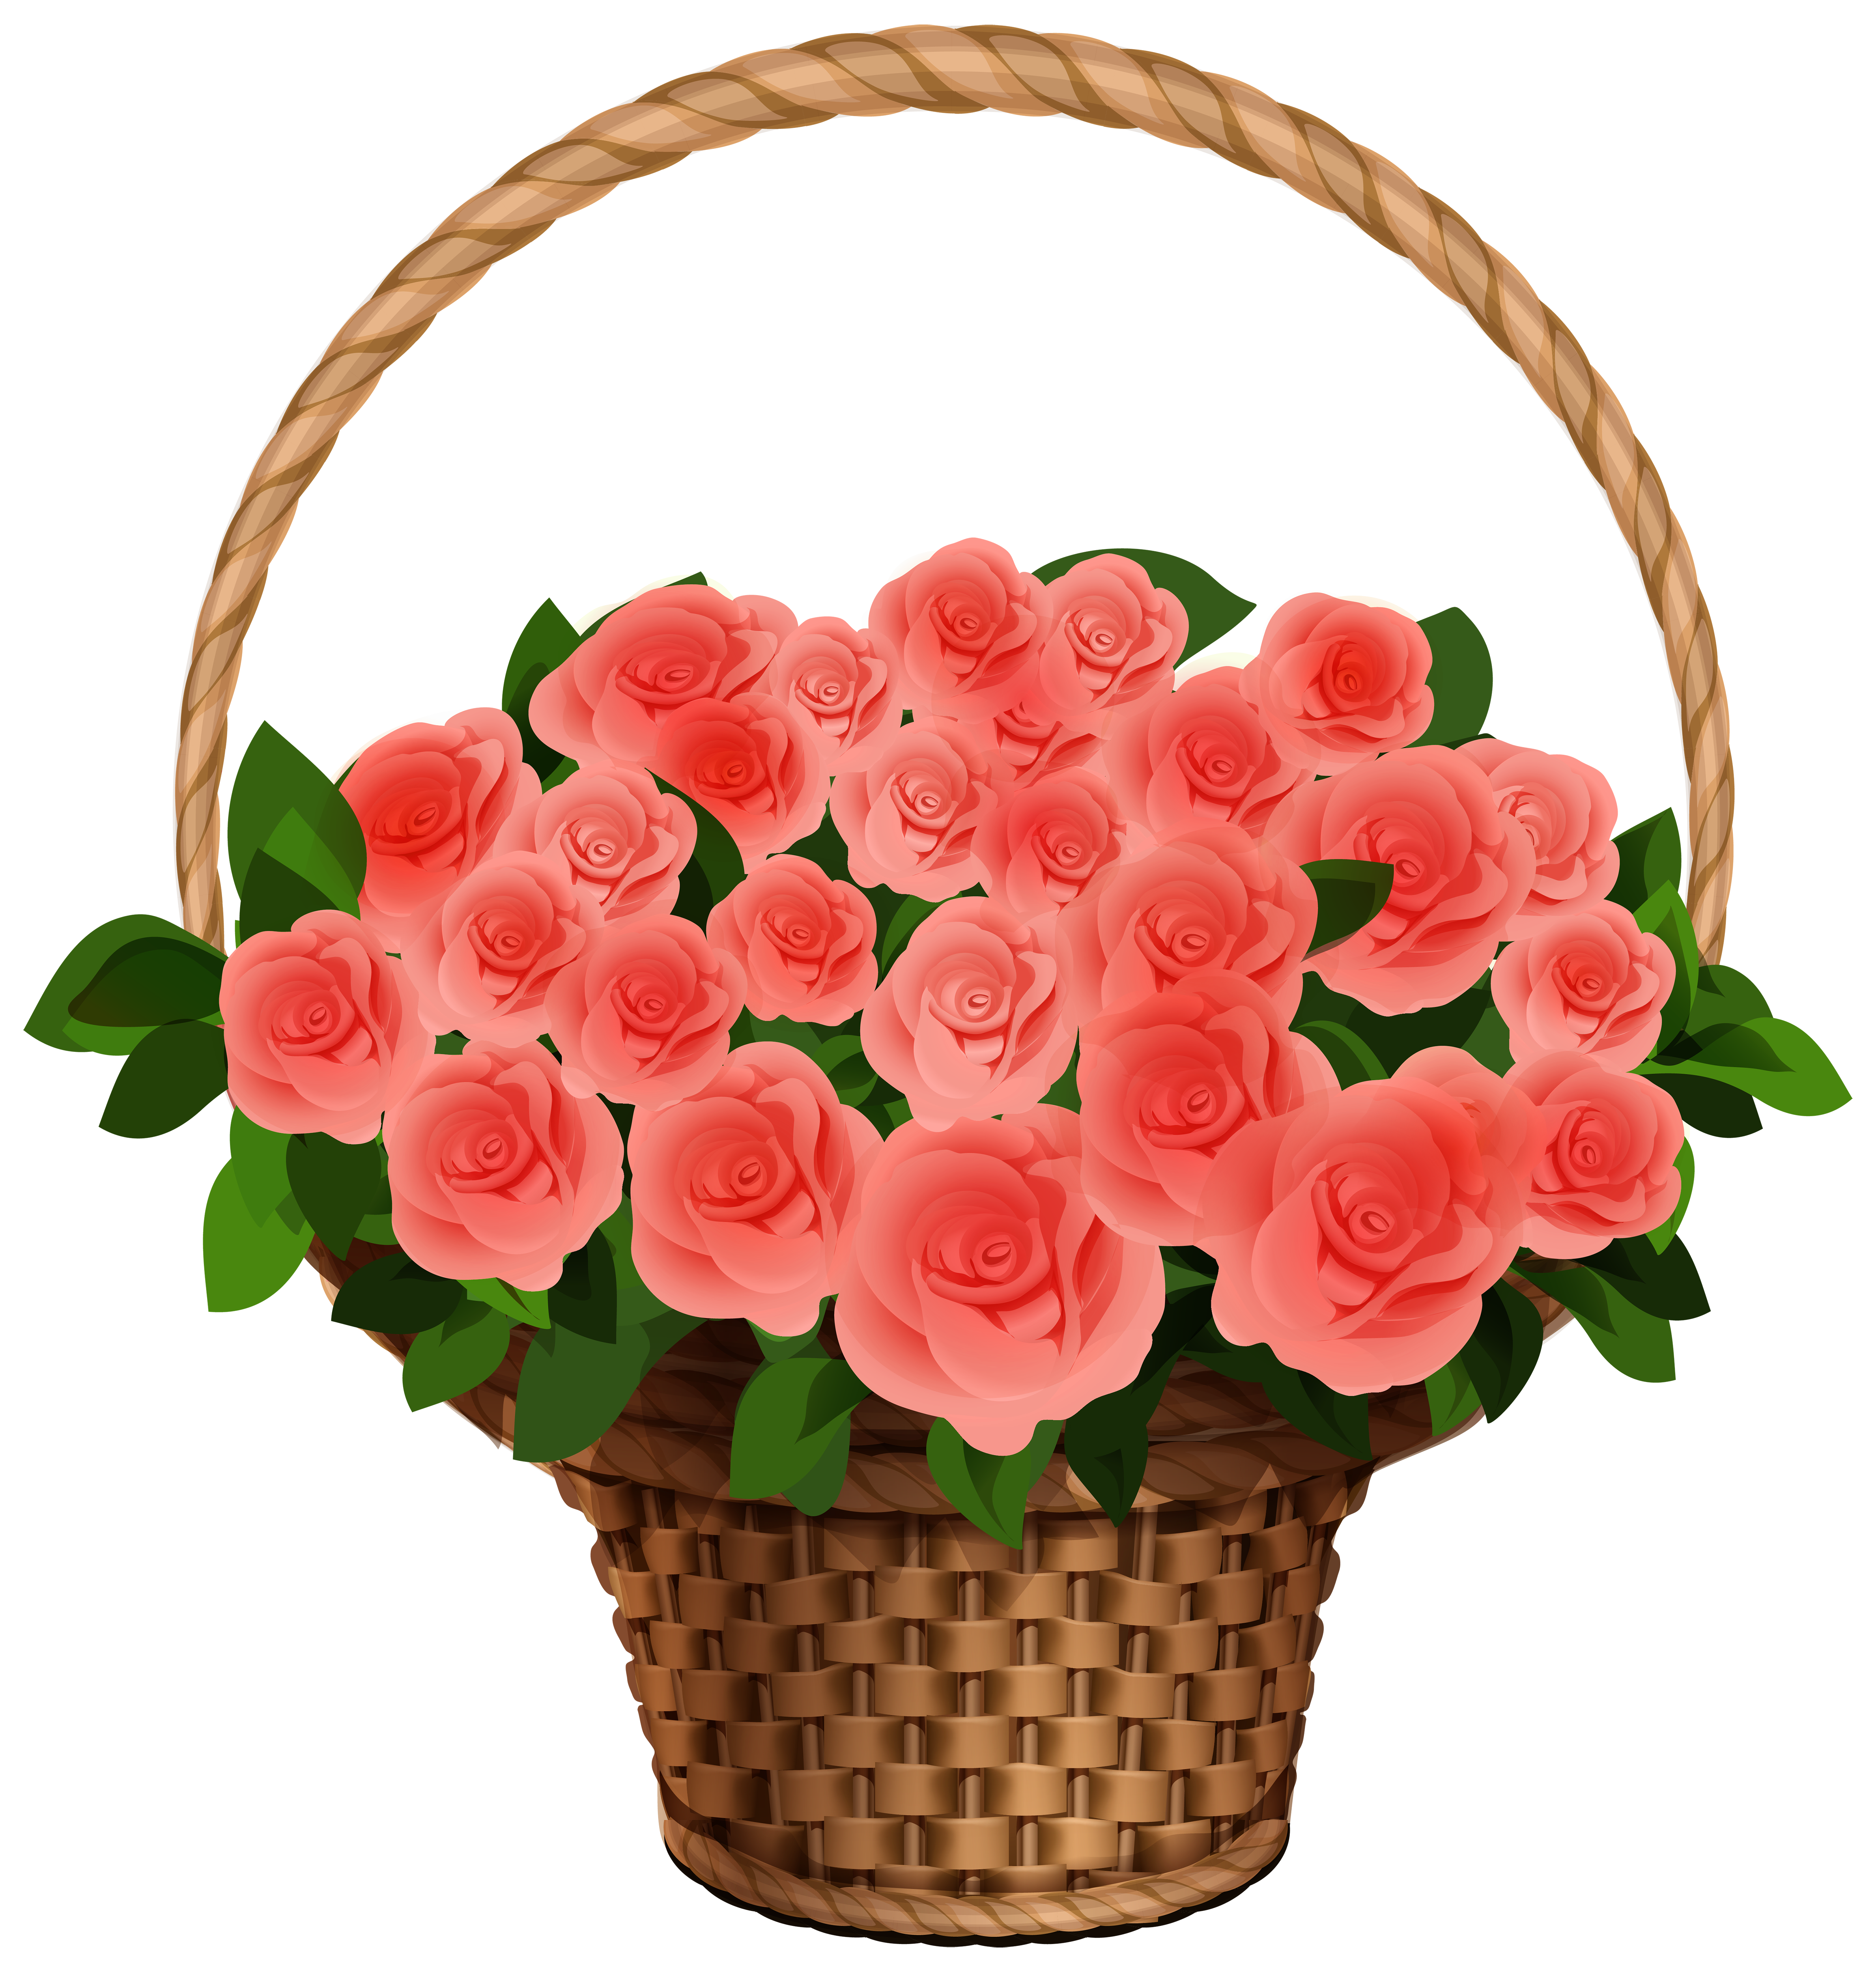 Basket with Red Roses PNG Clipart Image.